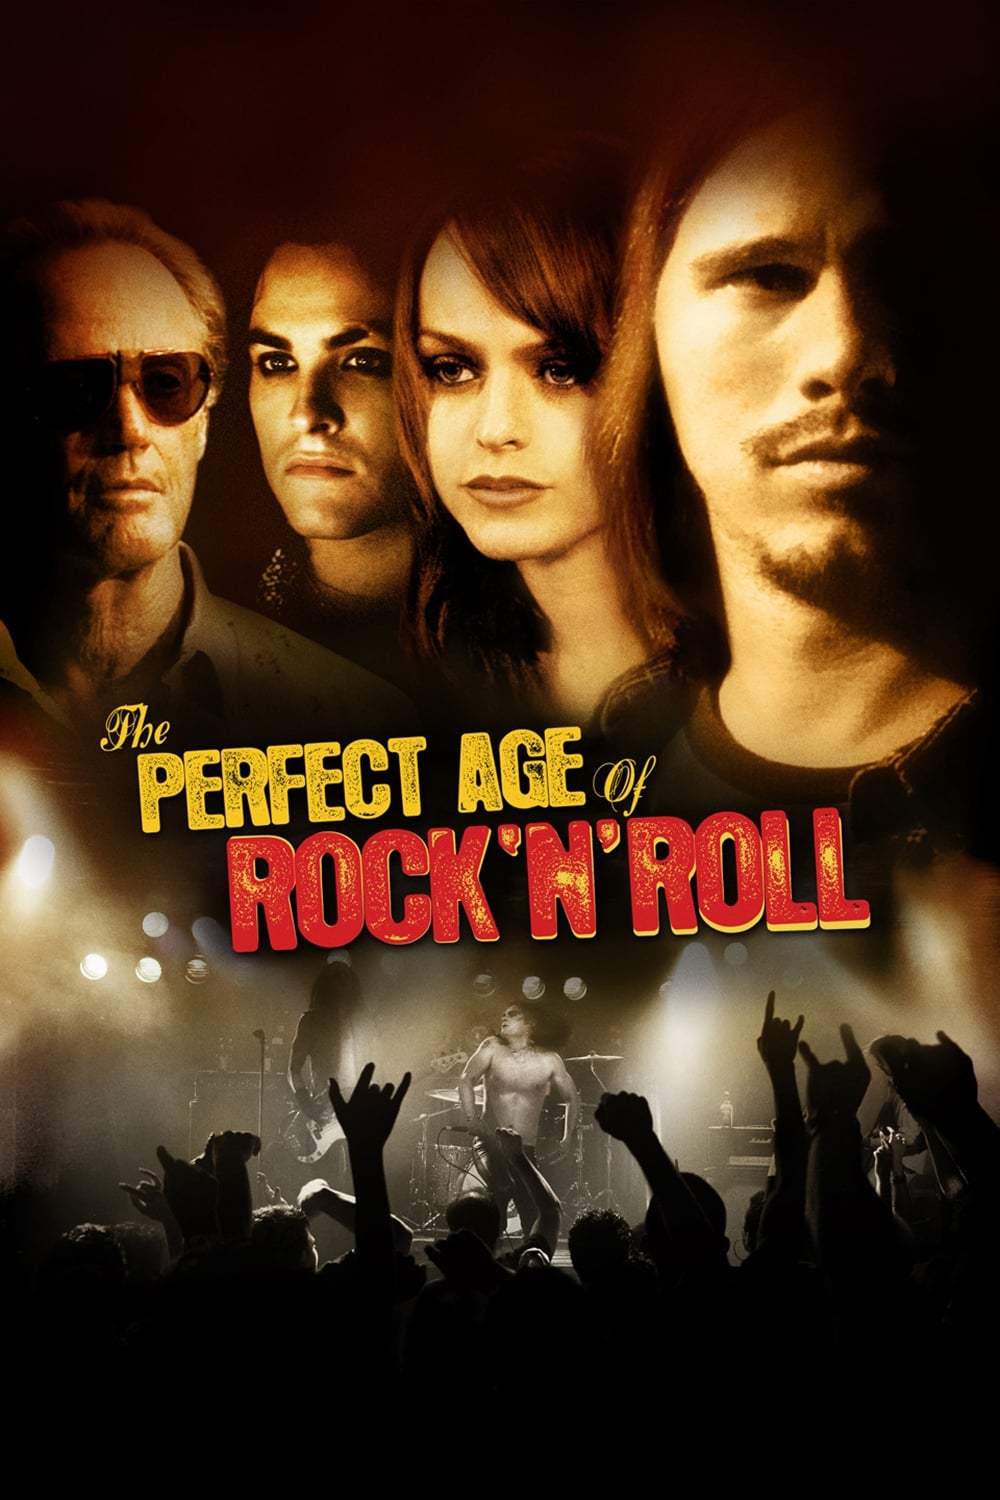 The Perfect Age of Rock 'n' Roll (2011)